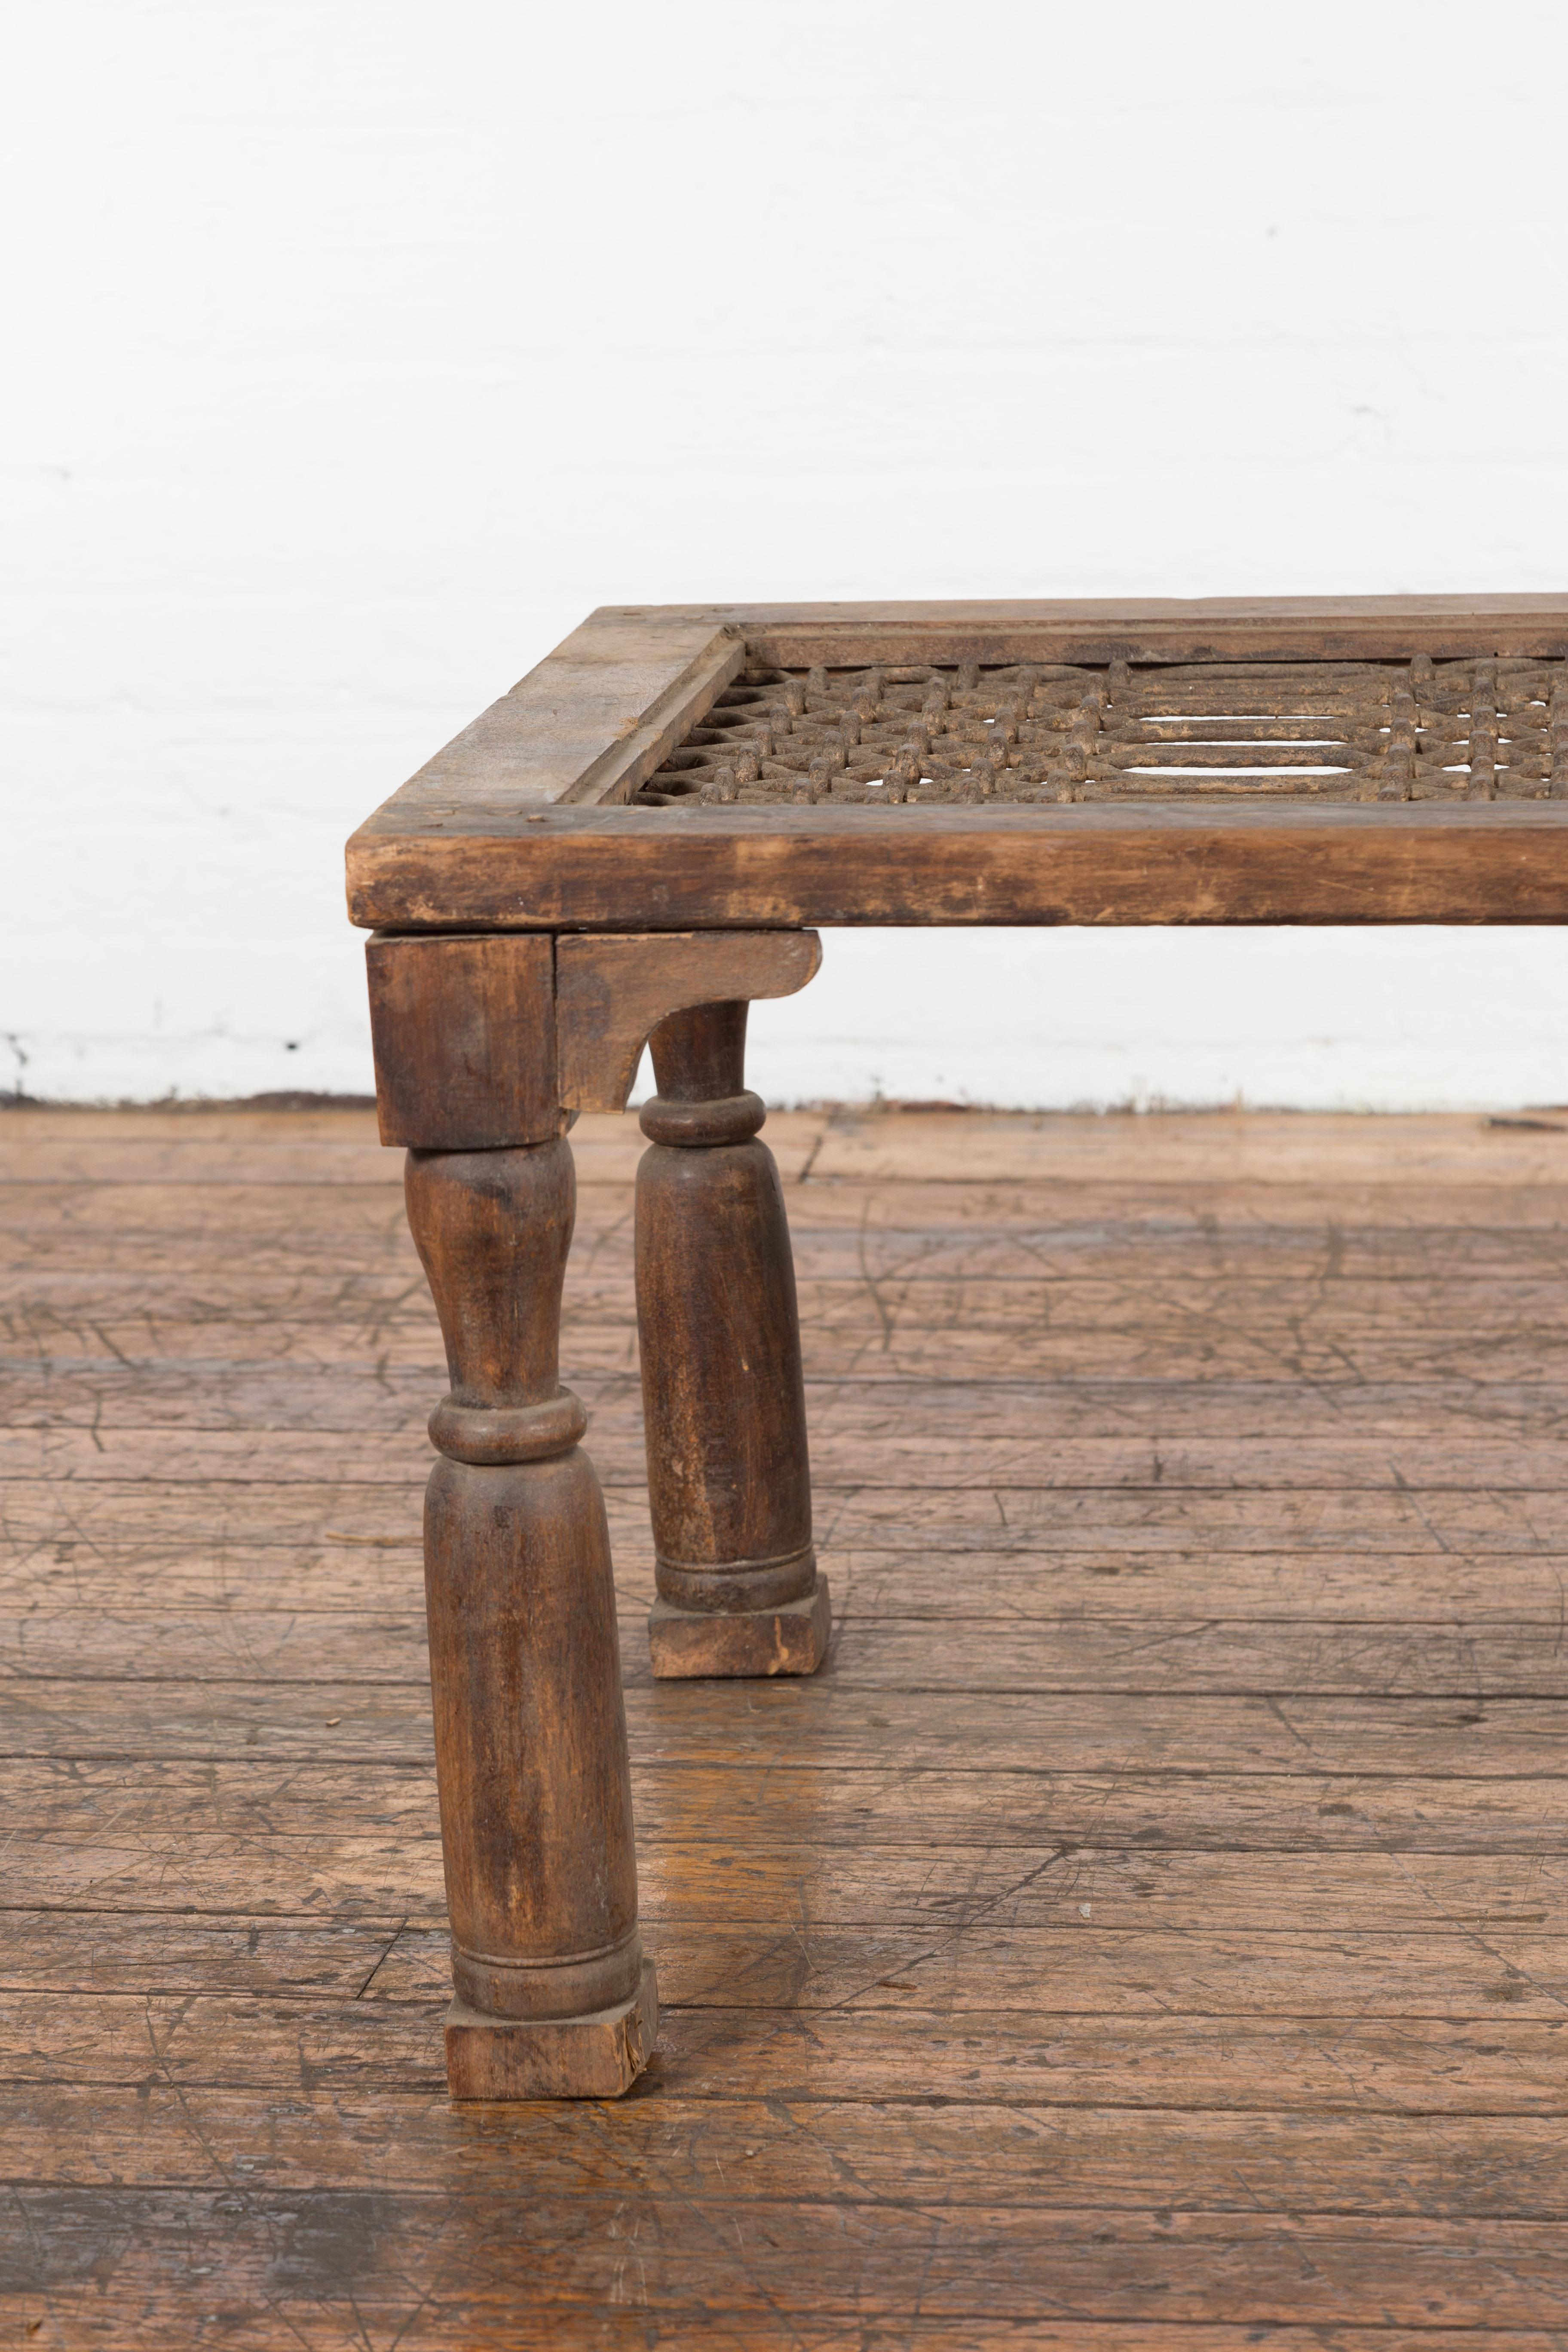 Rustic Antique Indian Window Grate Made into a Coffee Table with Turned Baluster Legs For Sale